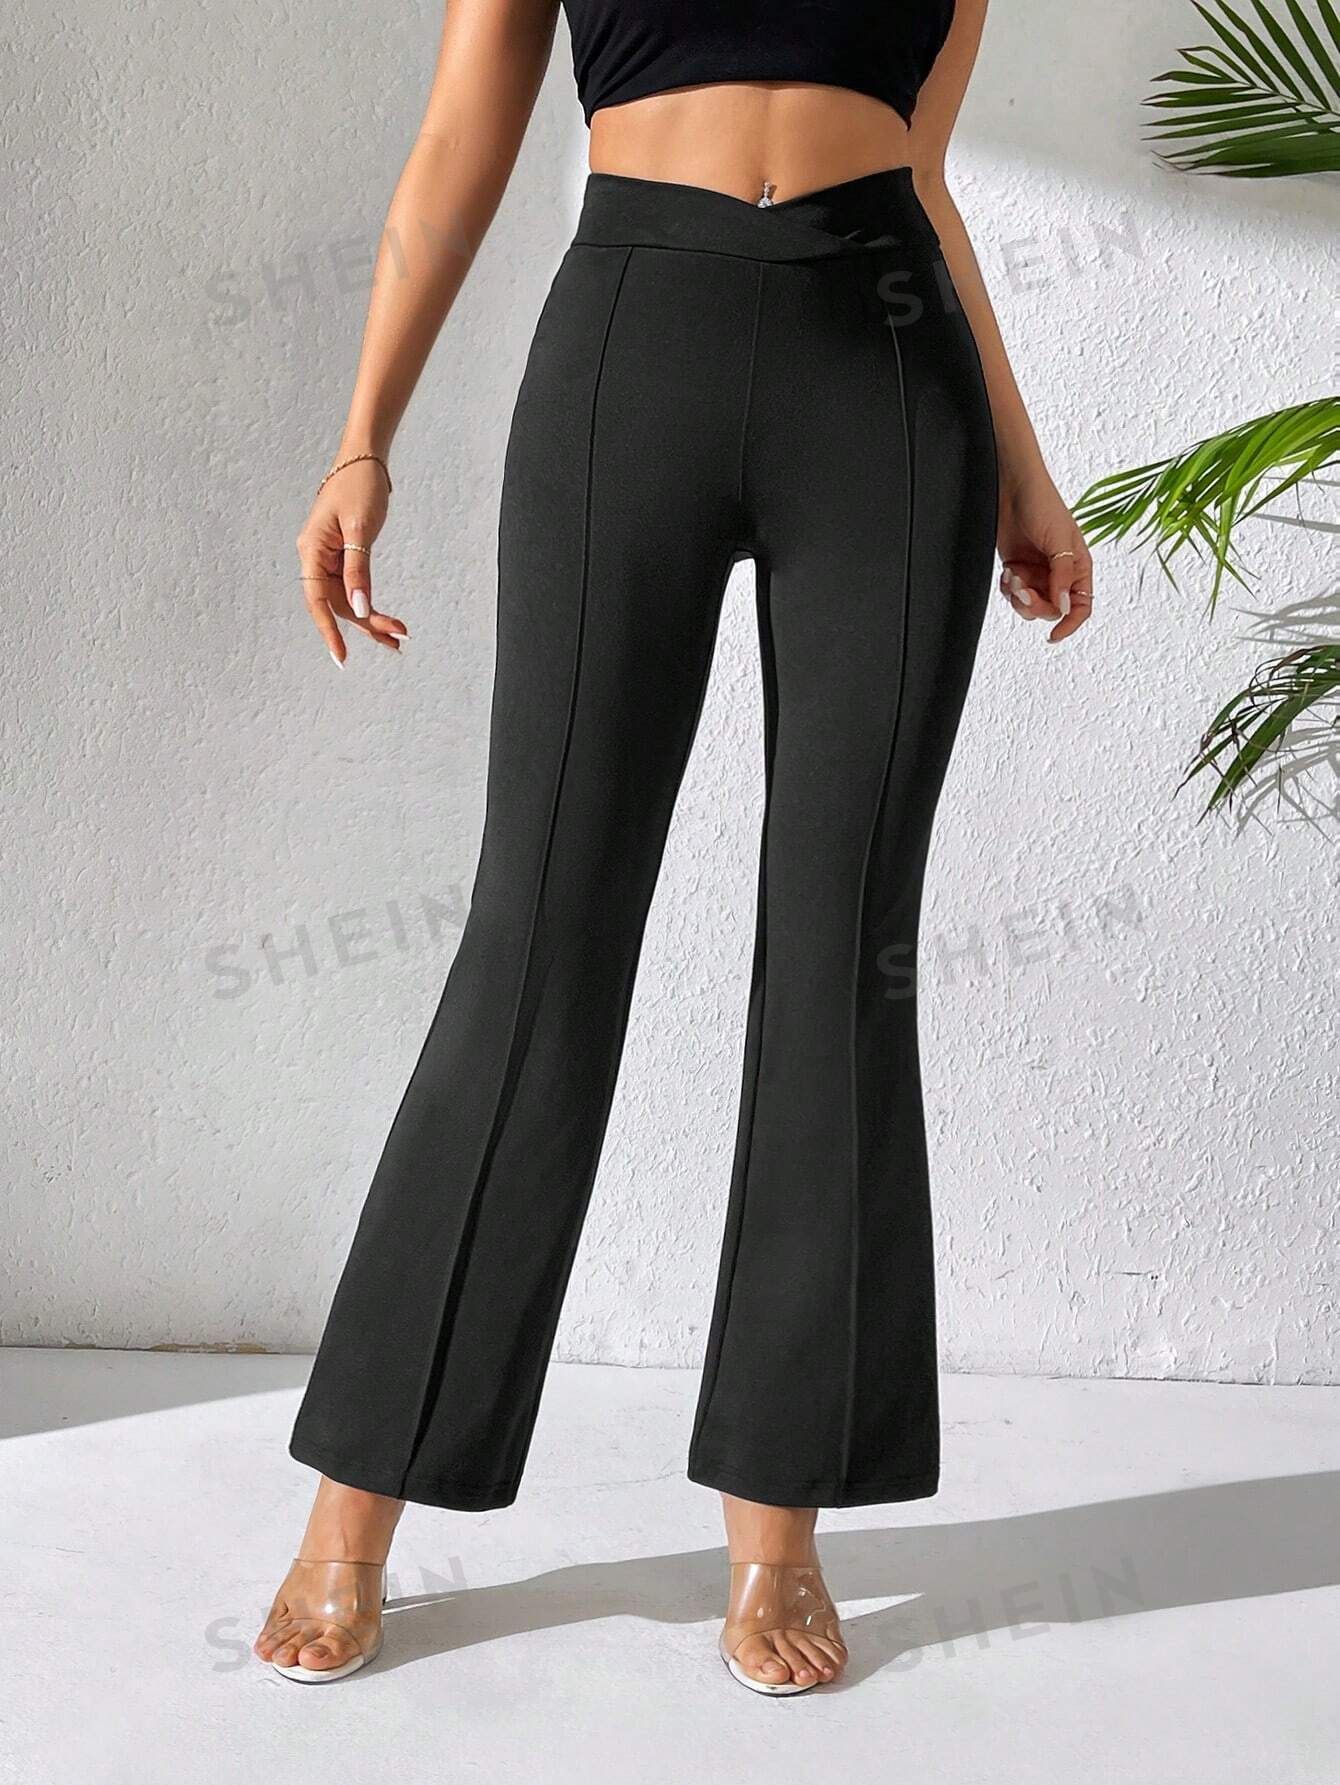 SHEIN PETITE Women's Solid Color Flared Pants | SHEIN